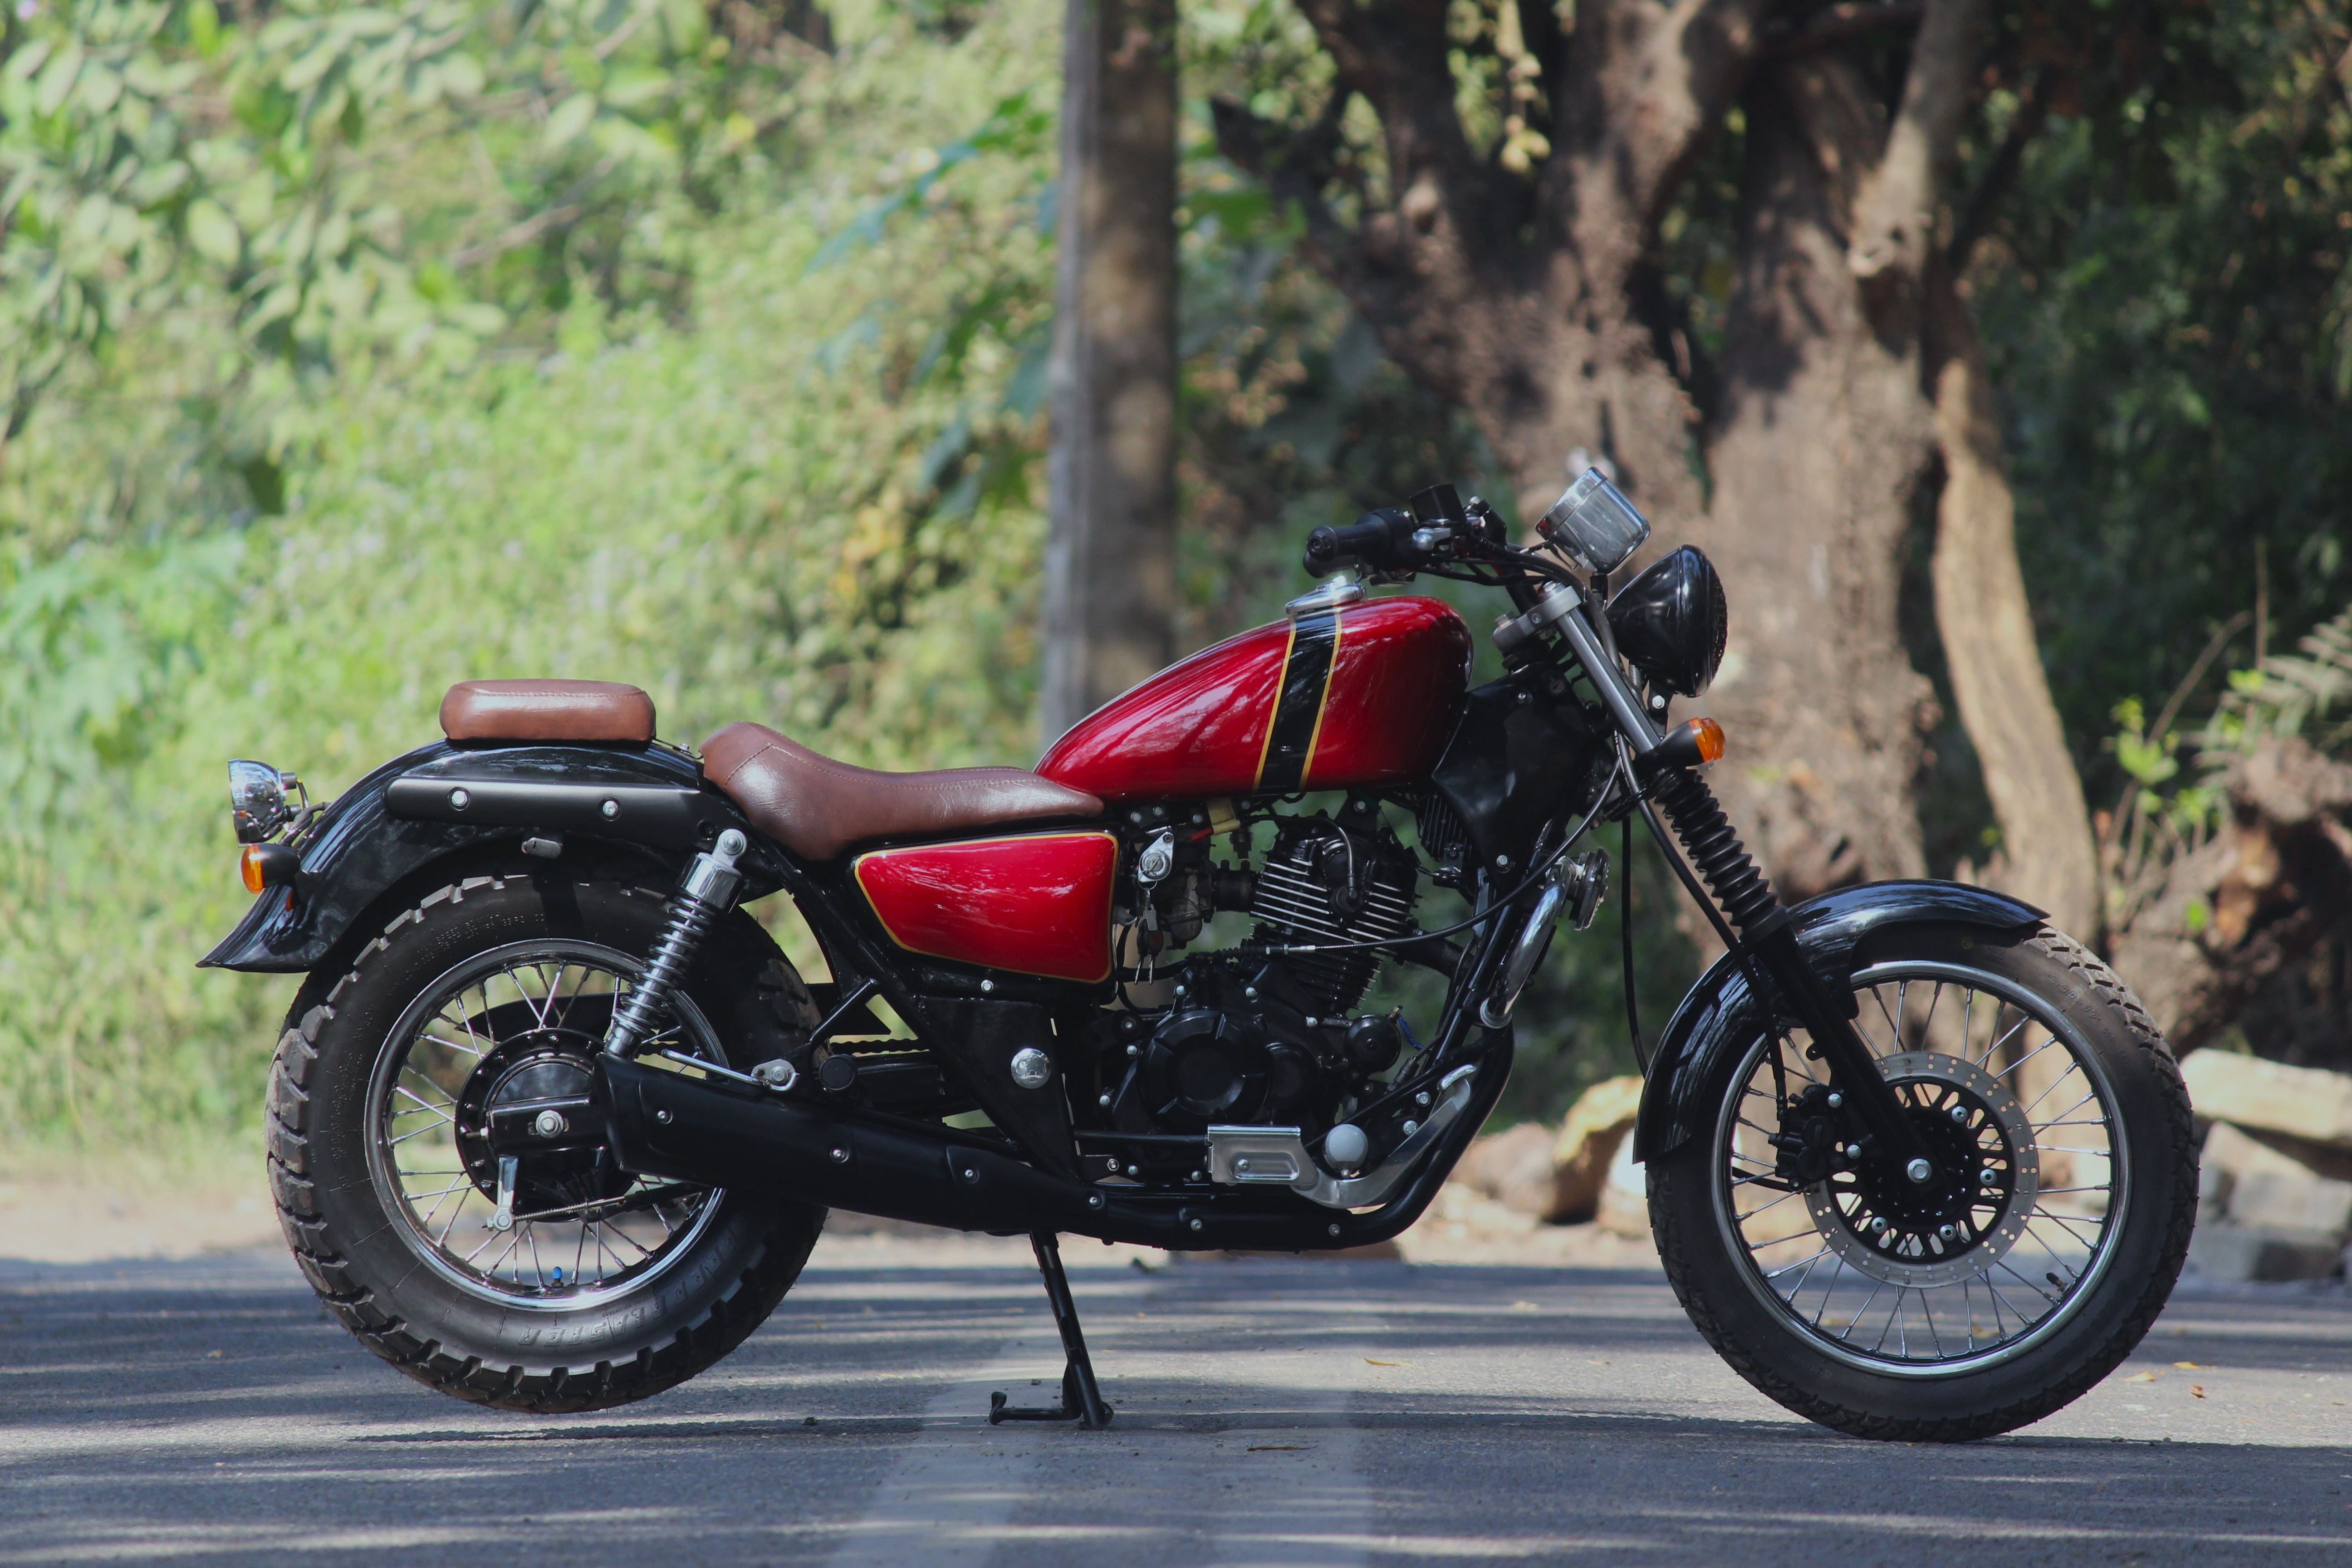 Meet Perfectly-Modified Bajaj Avenger Cruiser Motorcycle by JEDI Customs - right